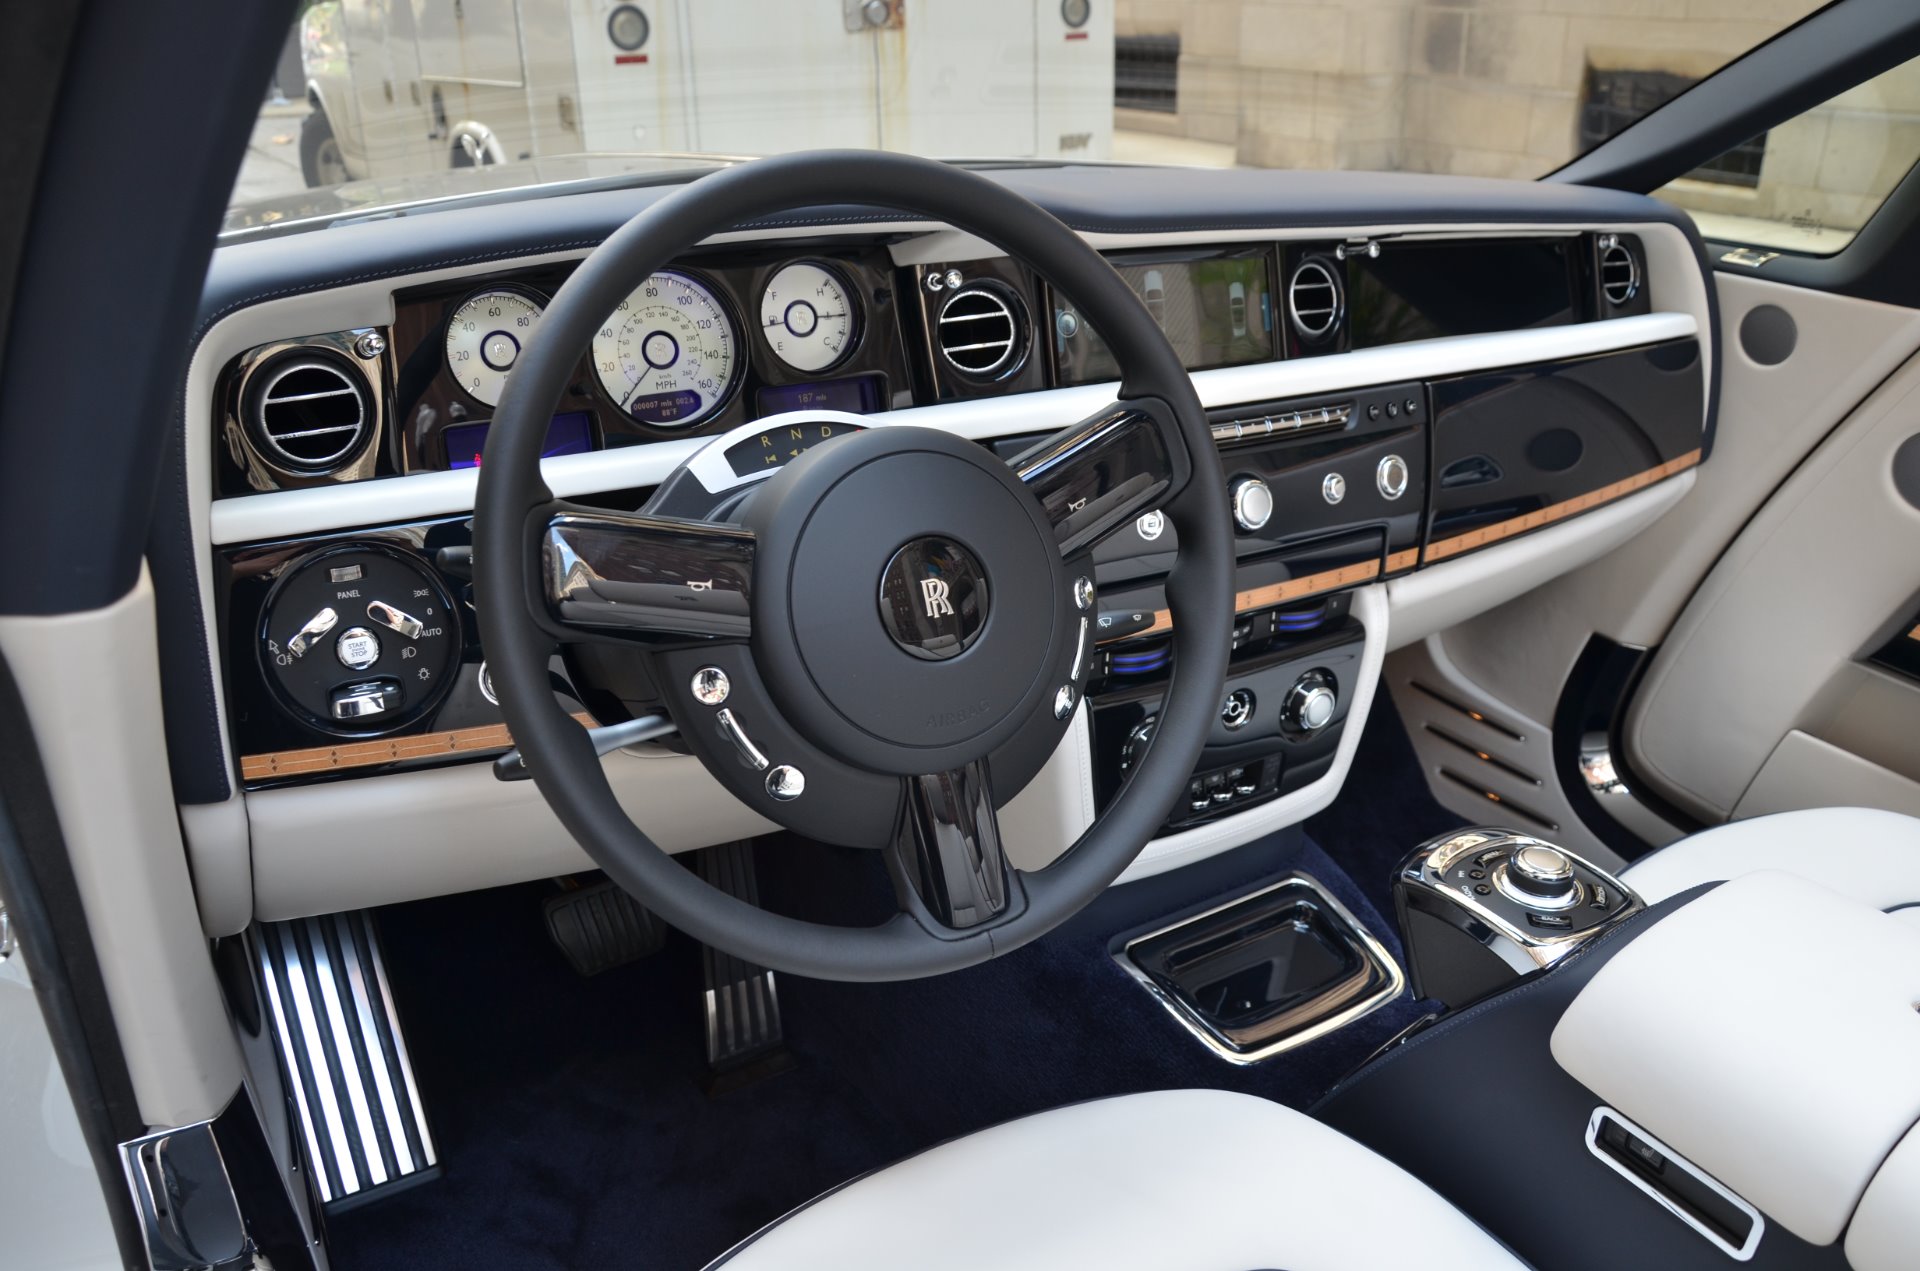 New Rolls Royce Phantom 2018 675L Drophead Coupe Photos Prices And Specs  in Bahrain